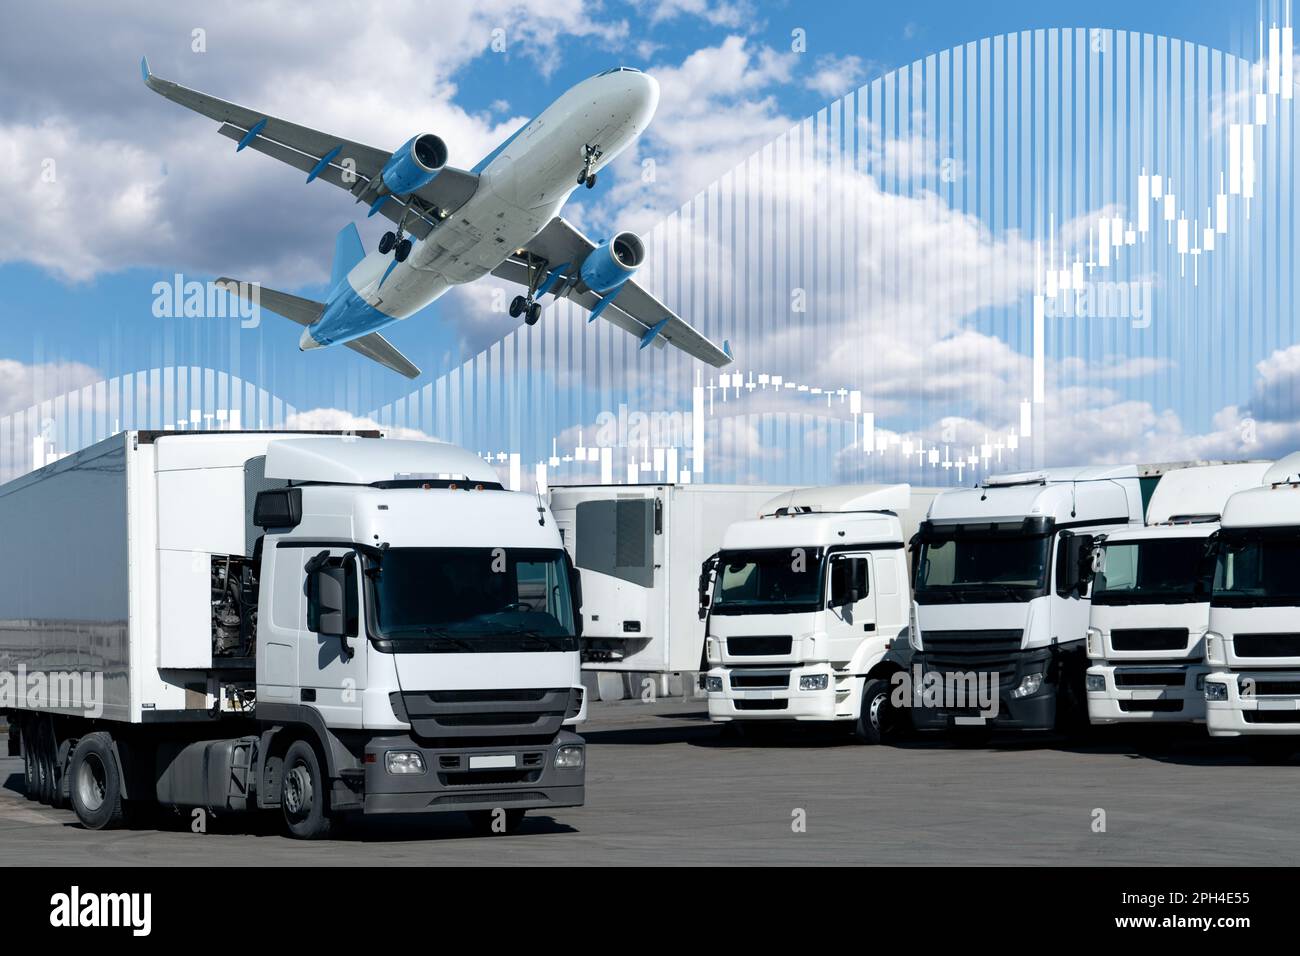 Airplane in the sky above the trucks. World trade and transportation concept Stock Photo